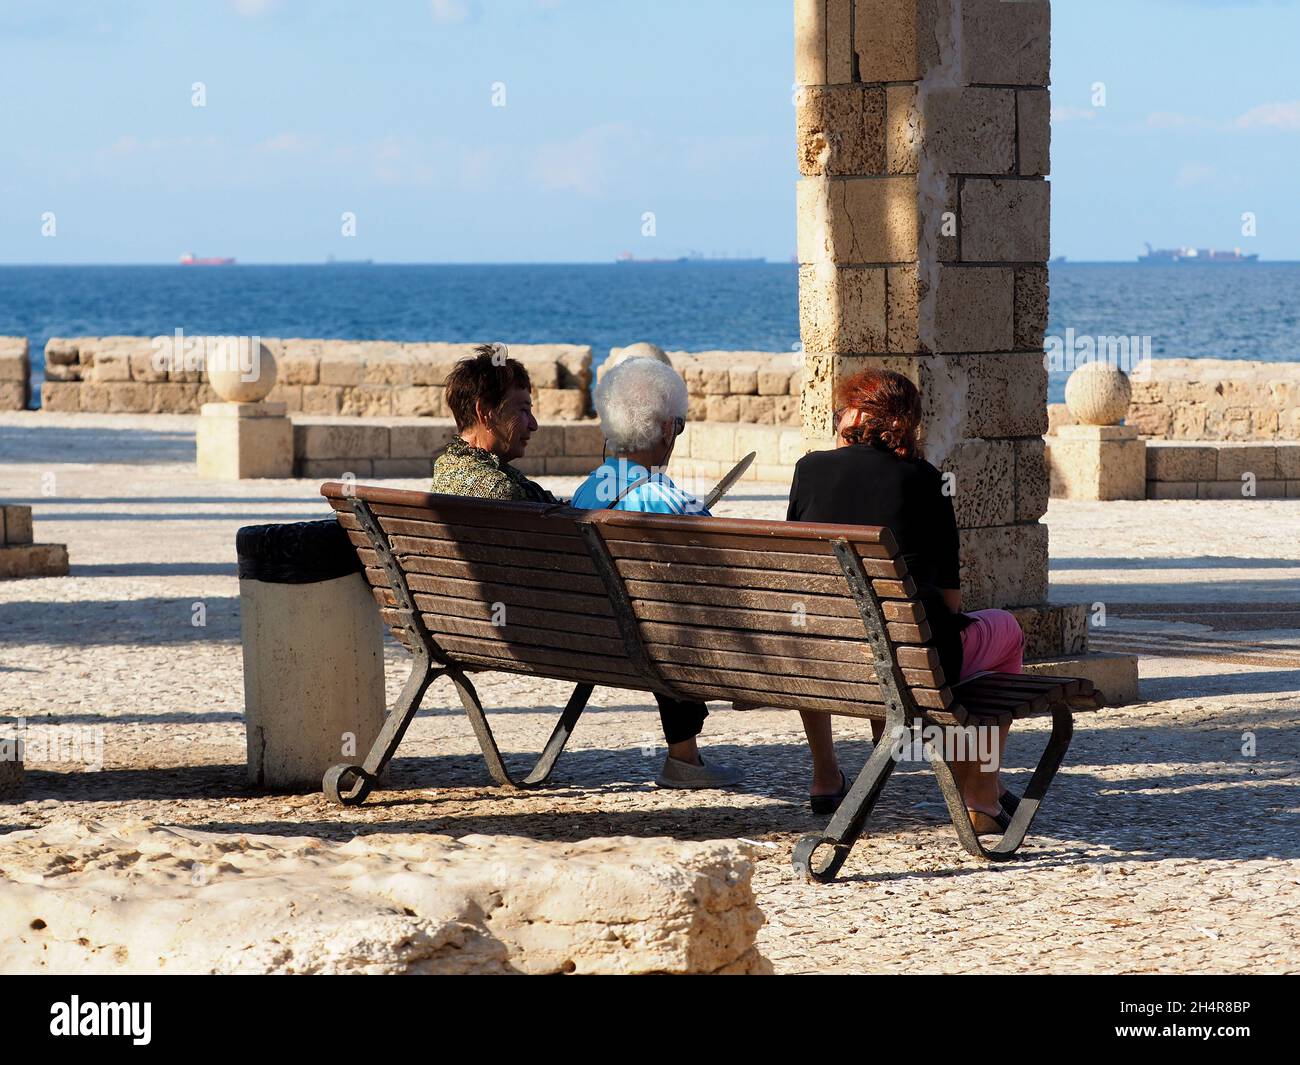 Three elderly women talk on a bench in the city of Akko by the sea. Israel. Stock Photo